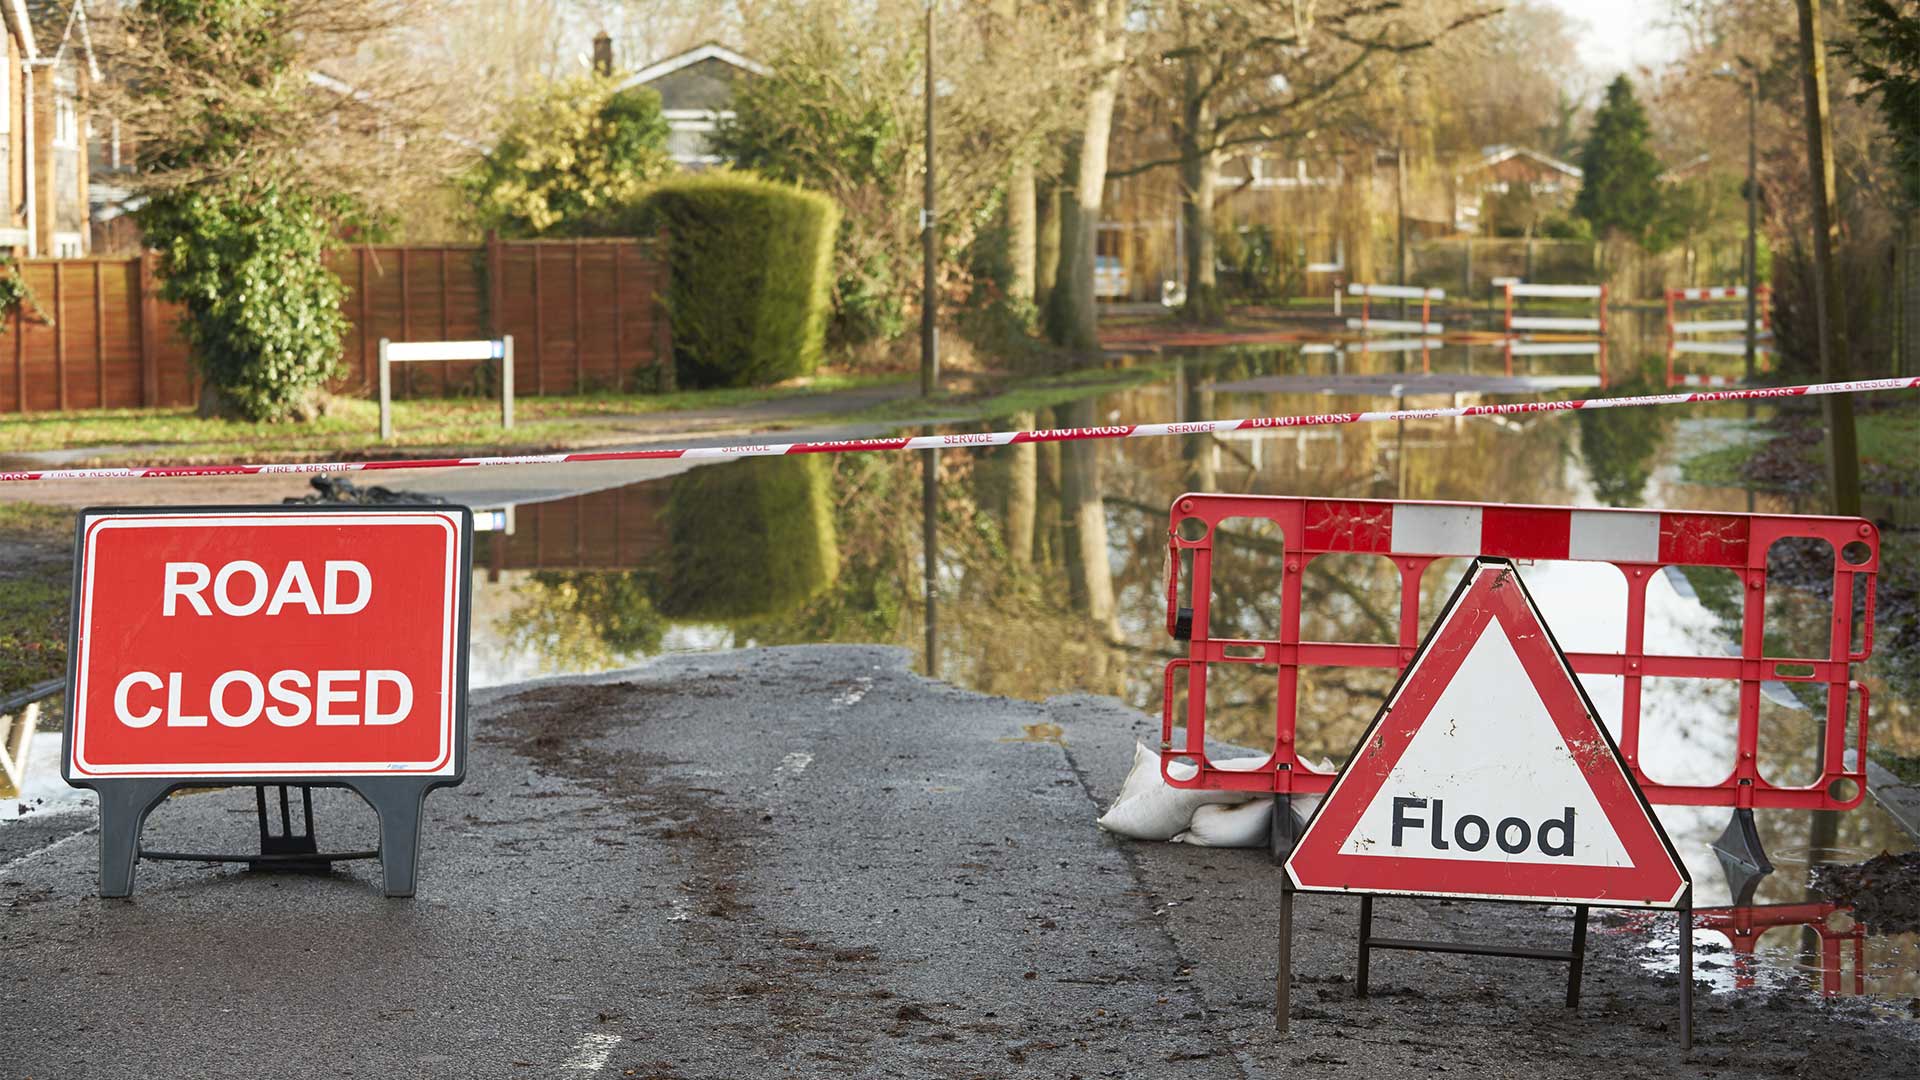 Flood risk planning & FEH22: Bridge the gap between theory and application